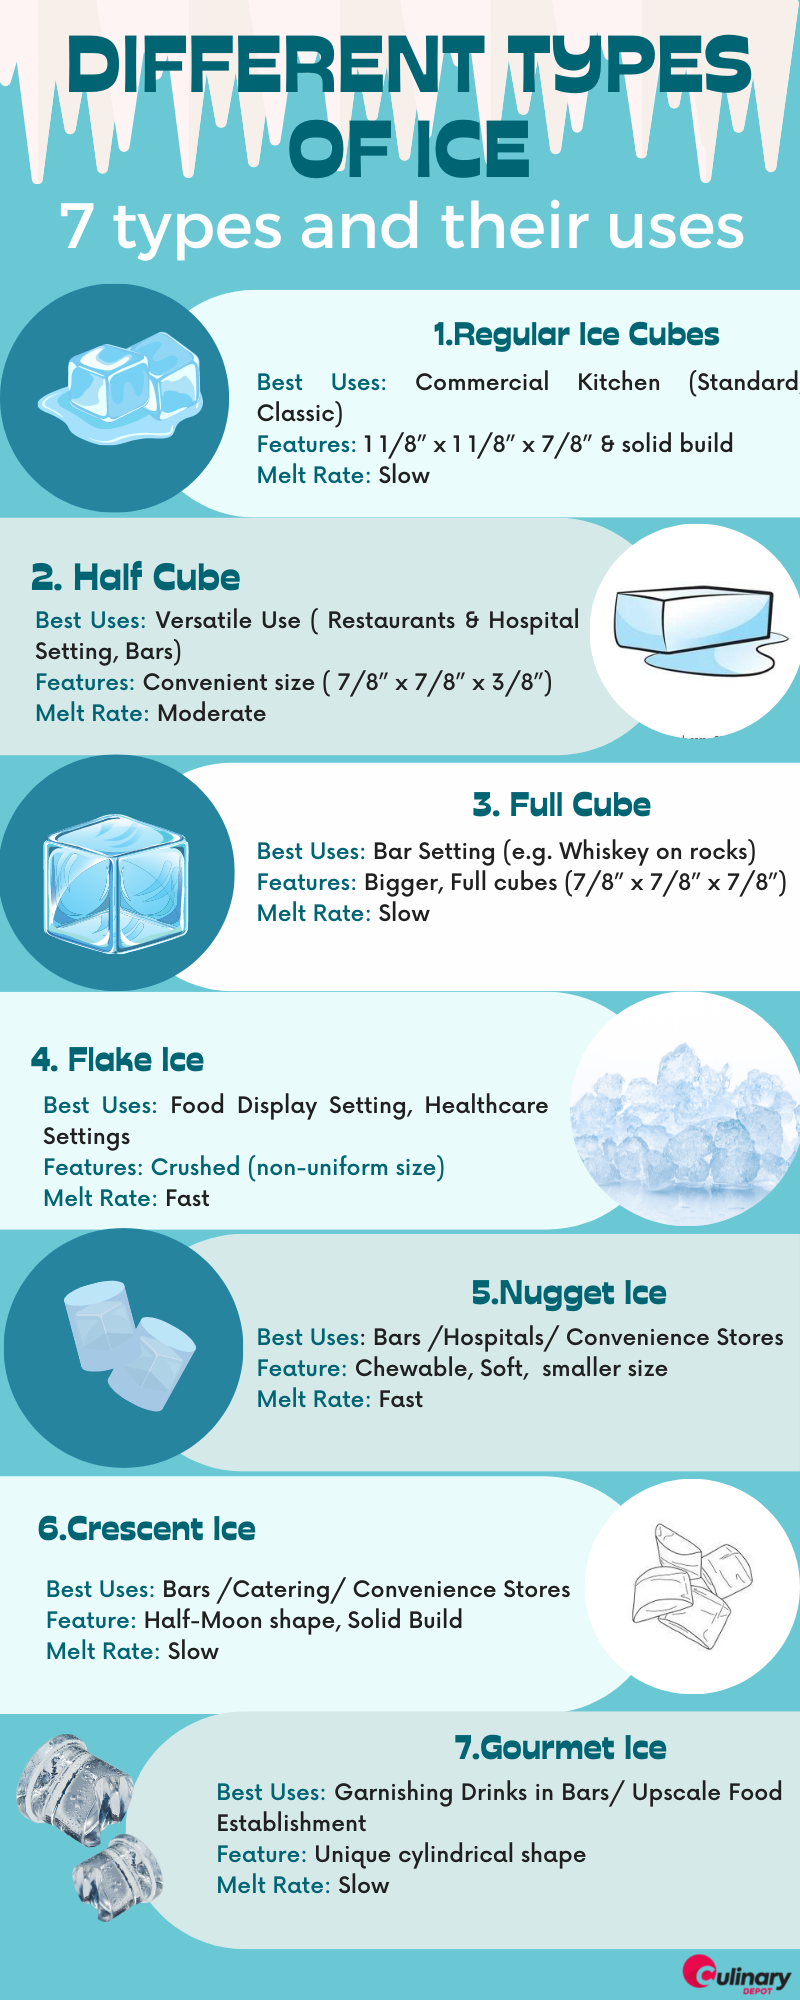 https://www.culinarydepotinc.com/product_images/uploaded_images/different-types-of-ice-and-their-uses-sizes-melt-rates.png